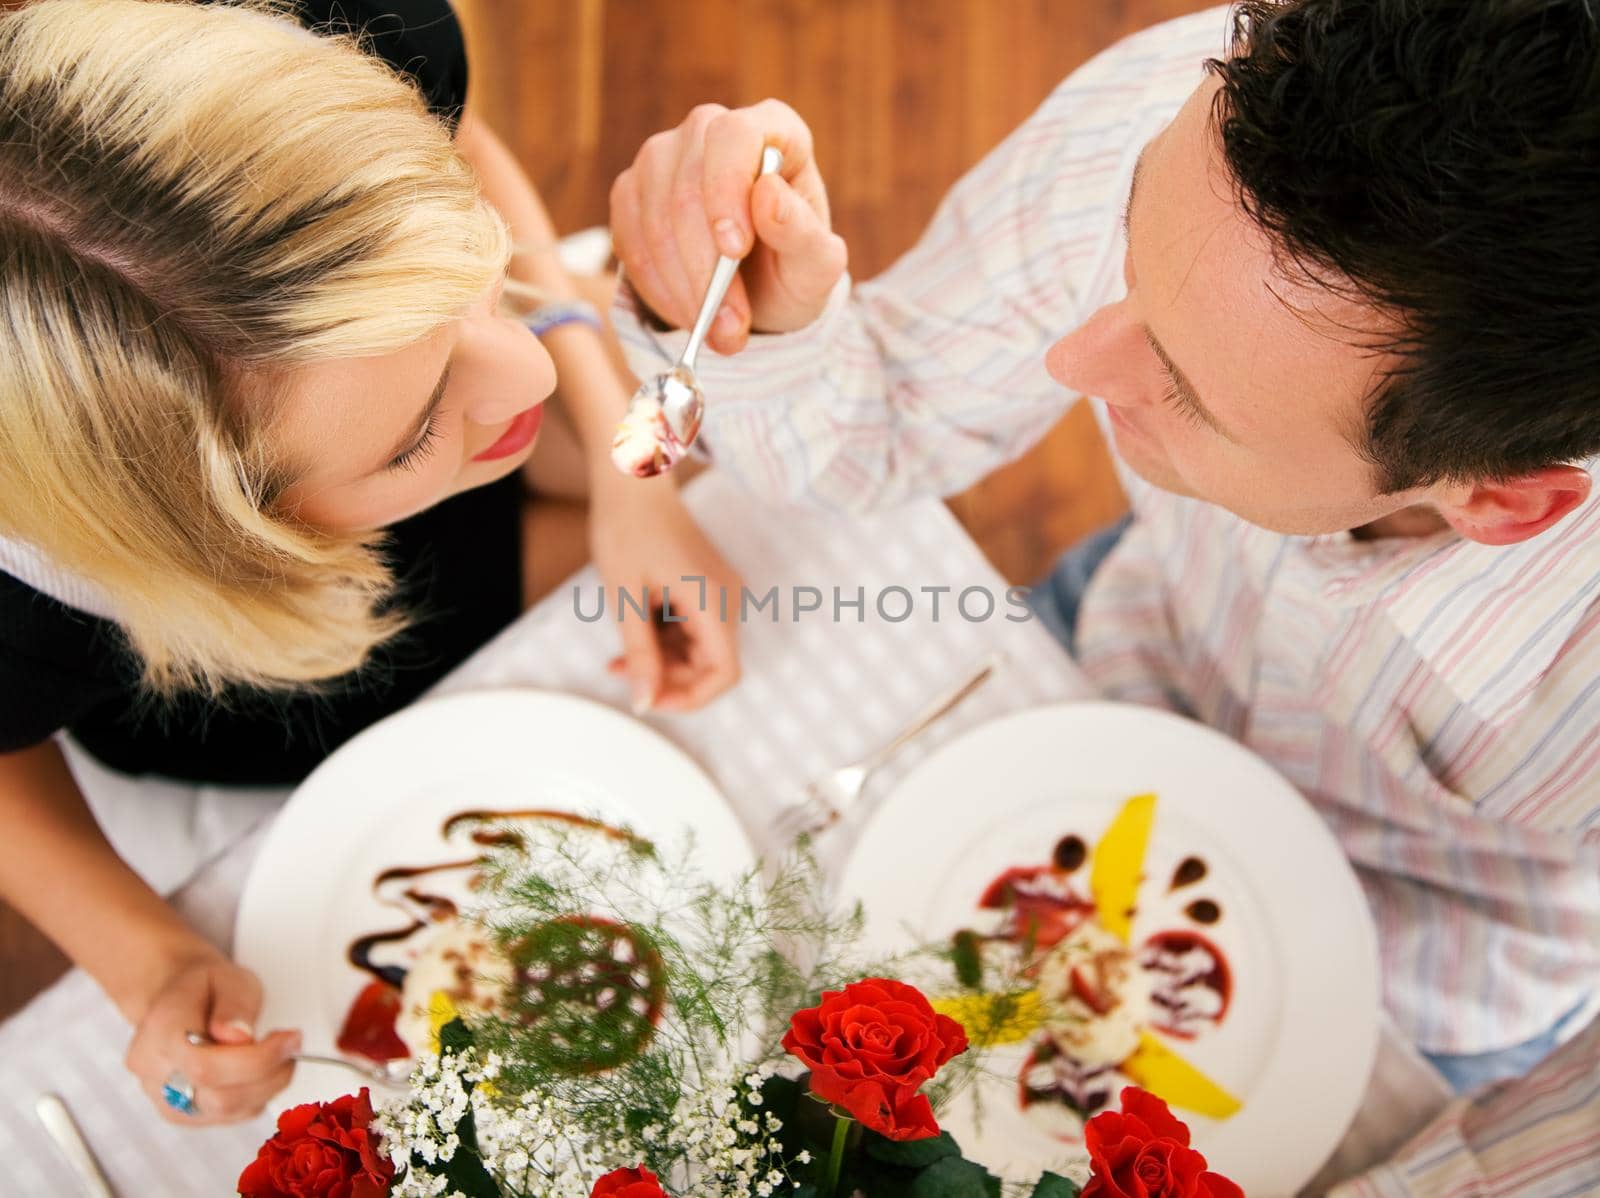 Young couple romantic dinner: he is feeding her with desert (yoghurt mousse); focus on faces